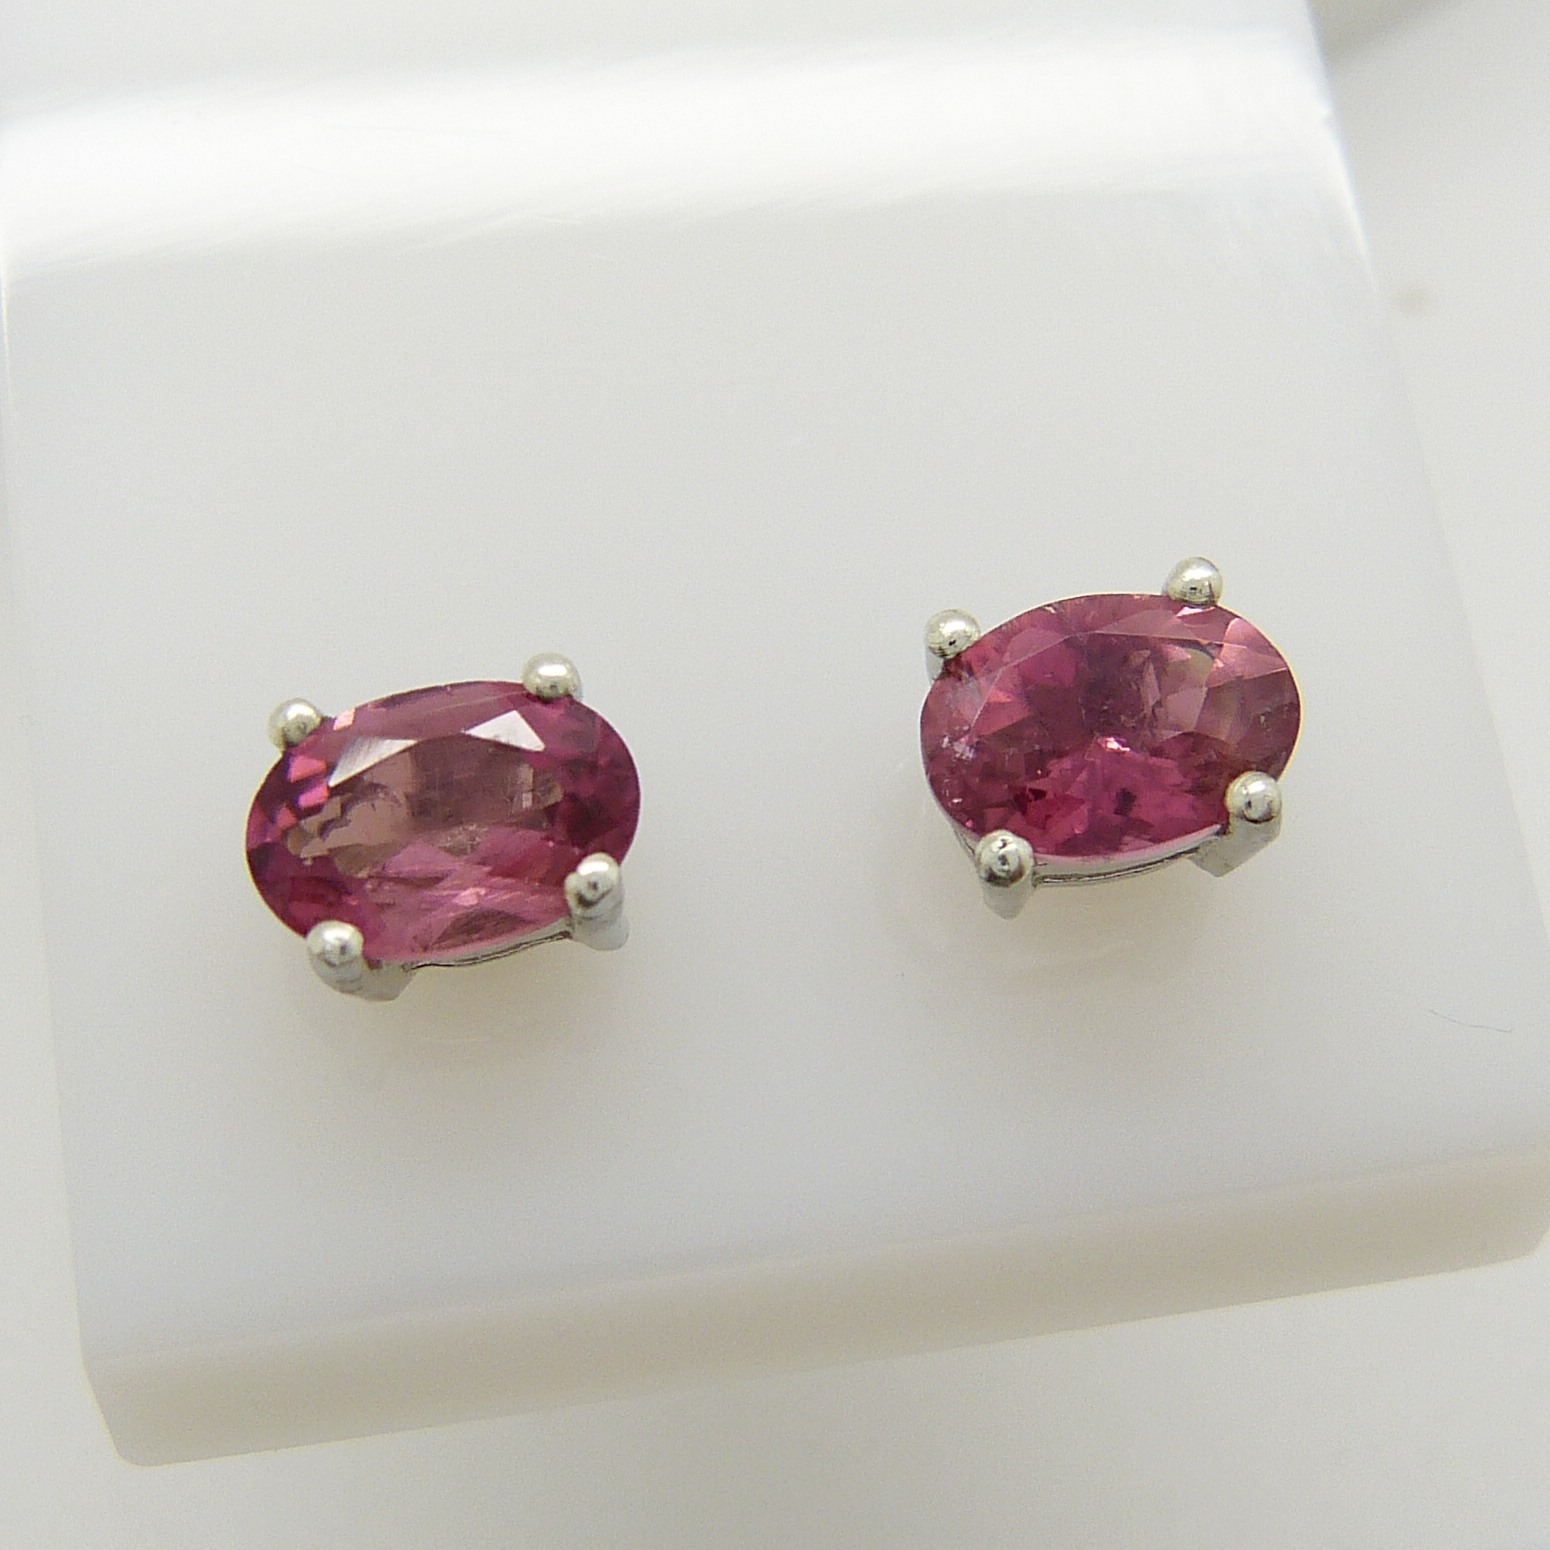 A pair of silver ear studs set with pink tourmalines, 1.30 carats (approx). - Image 2 of 5